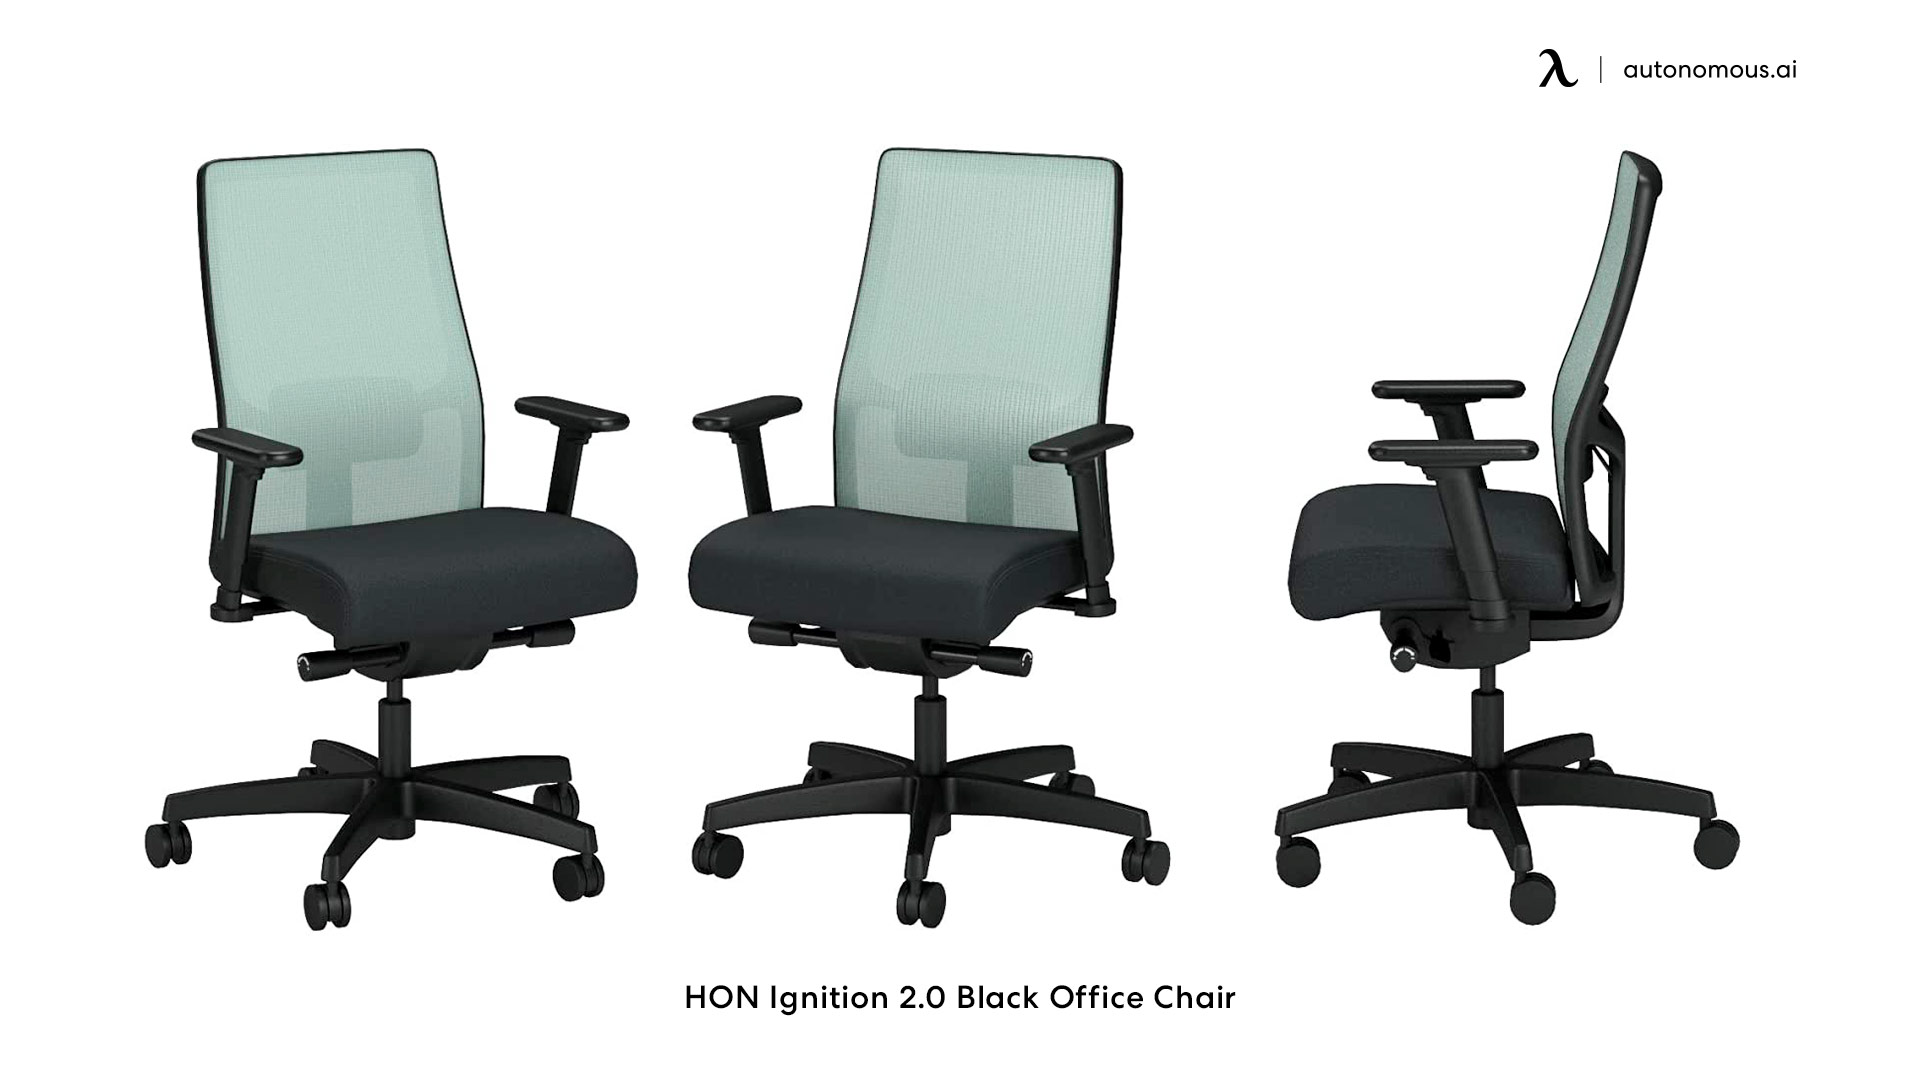 The HON Ignite 2.0 straight back office chair